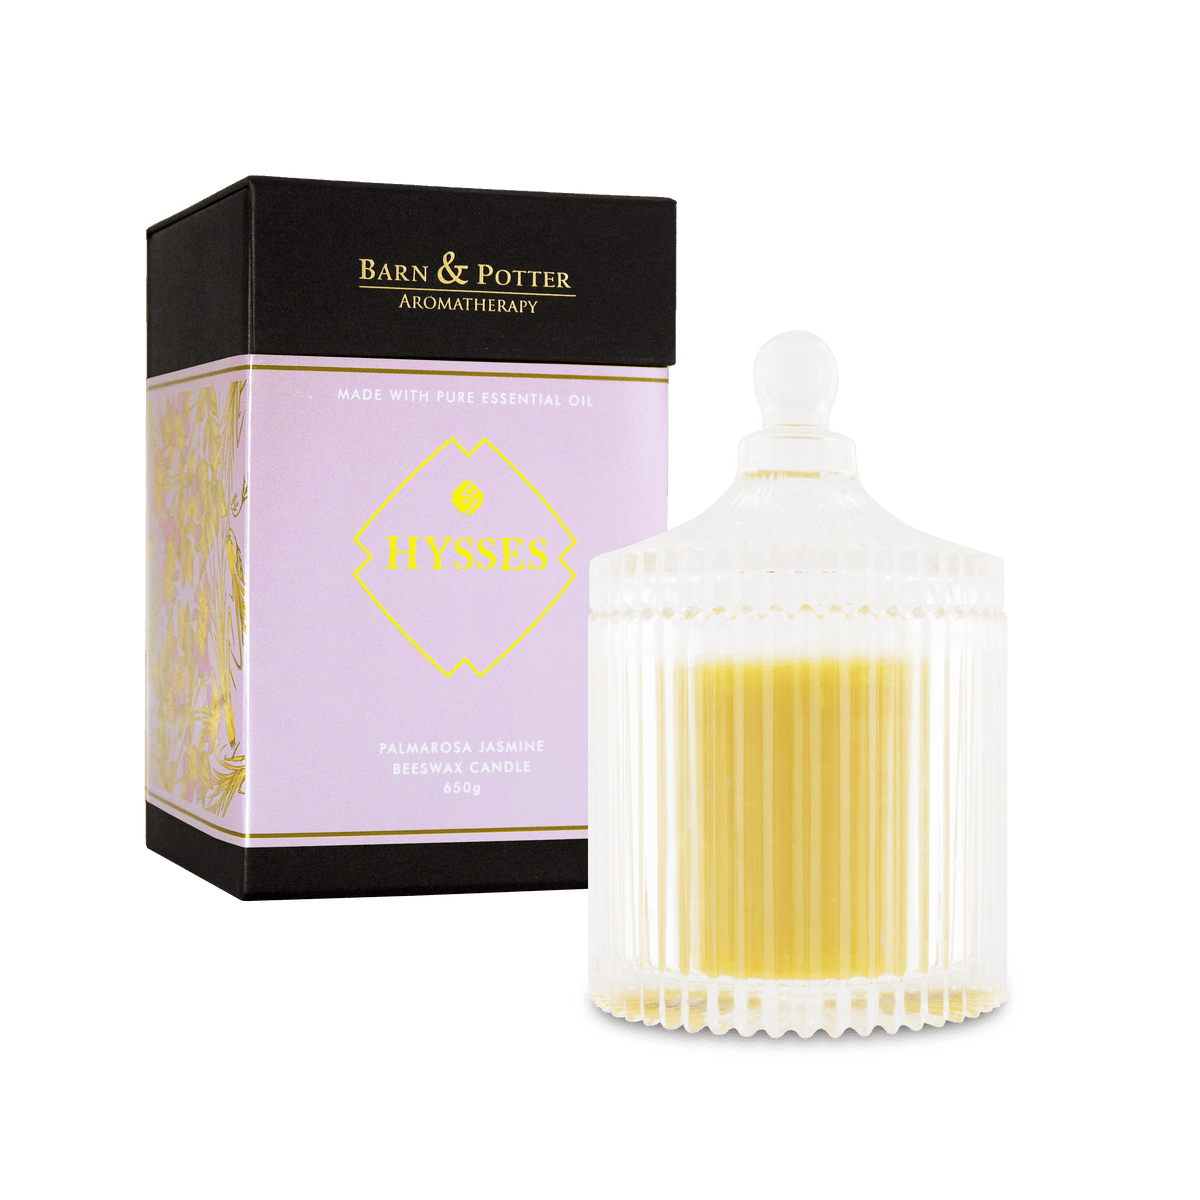 Hysses Home Scents 650g Beeswax Candle Palmarosa Jasmine